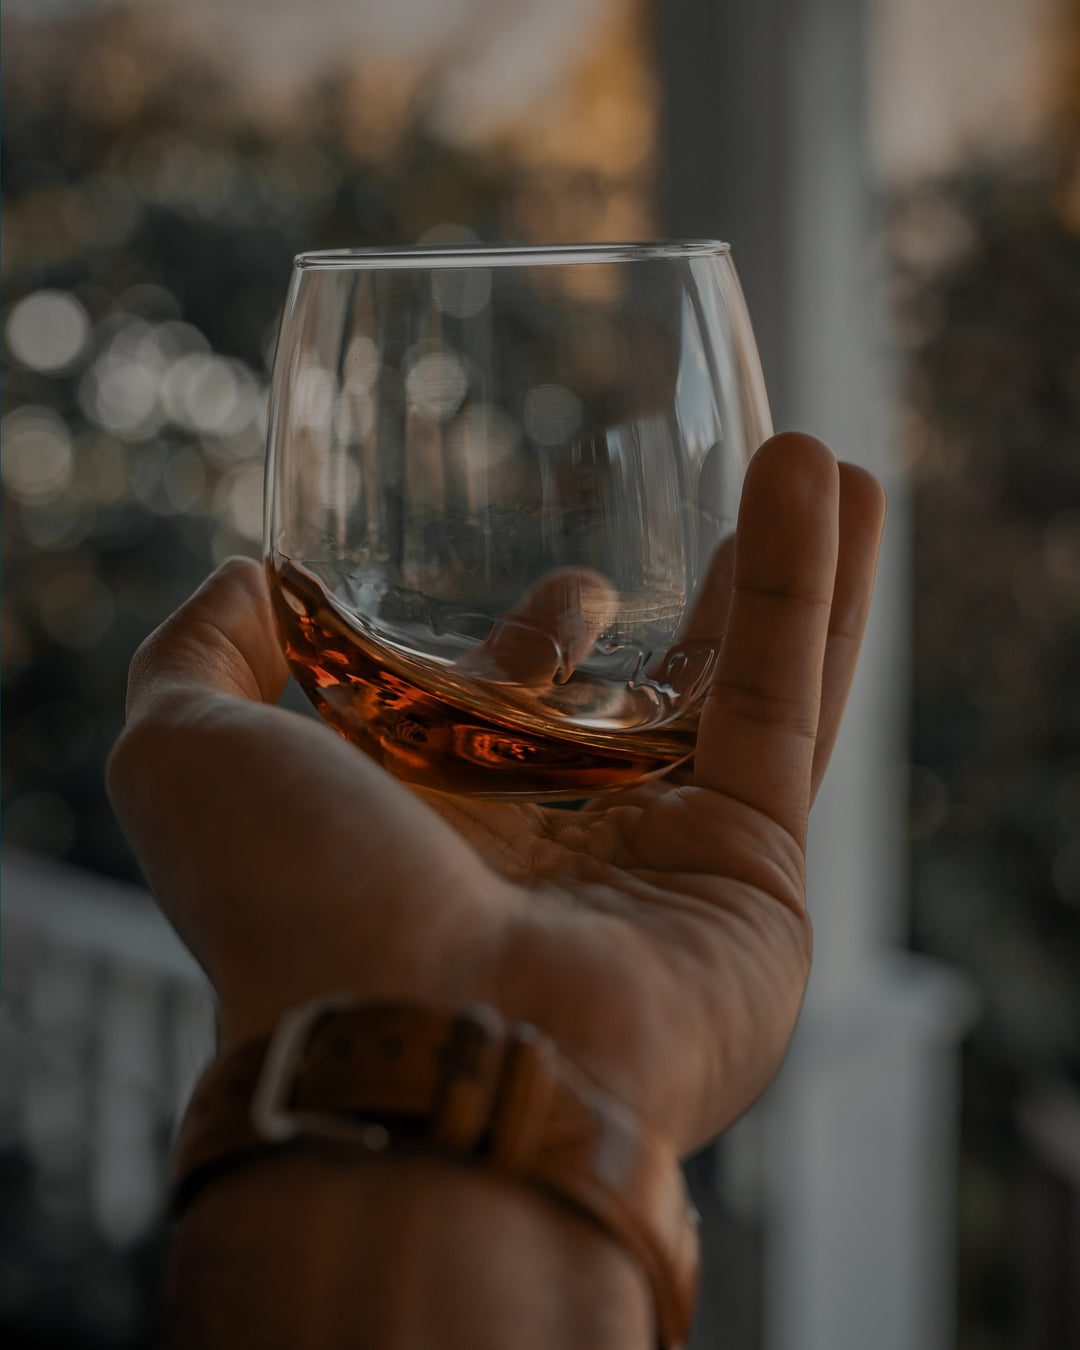 How to Nose and Taste Whiskey Like a Pro